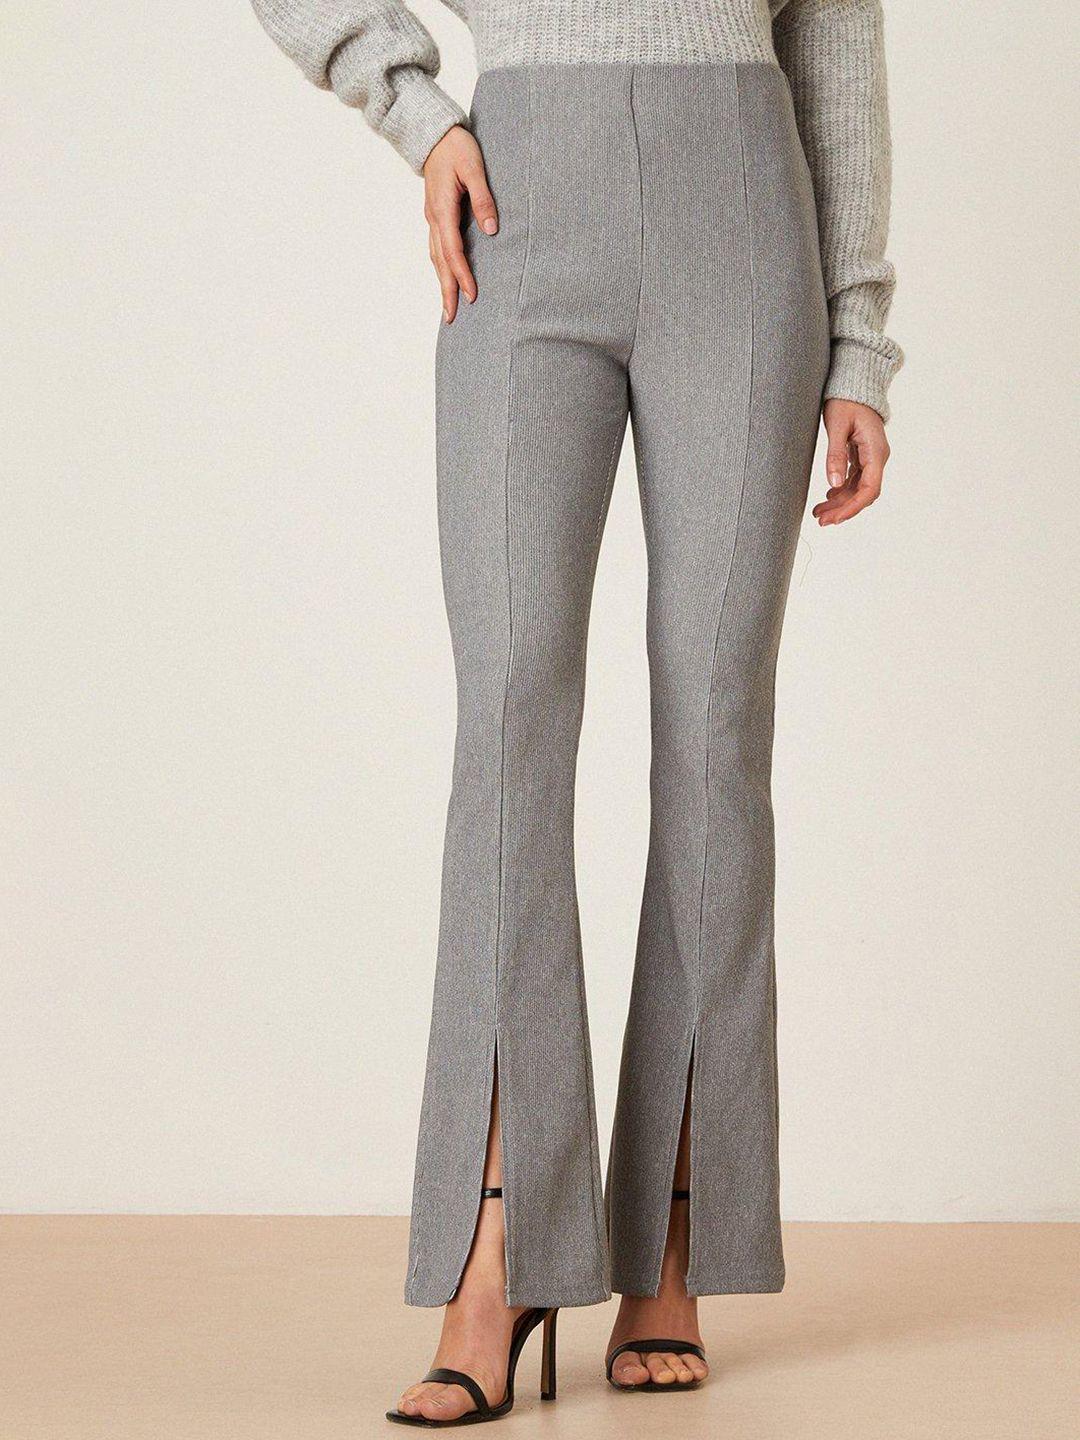 dorothy perkins women ribbed smart stretch flared trousers